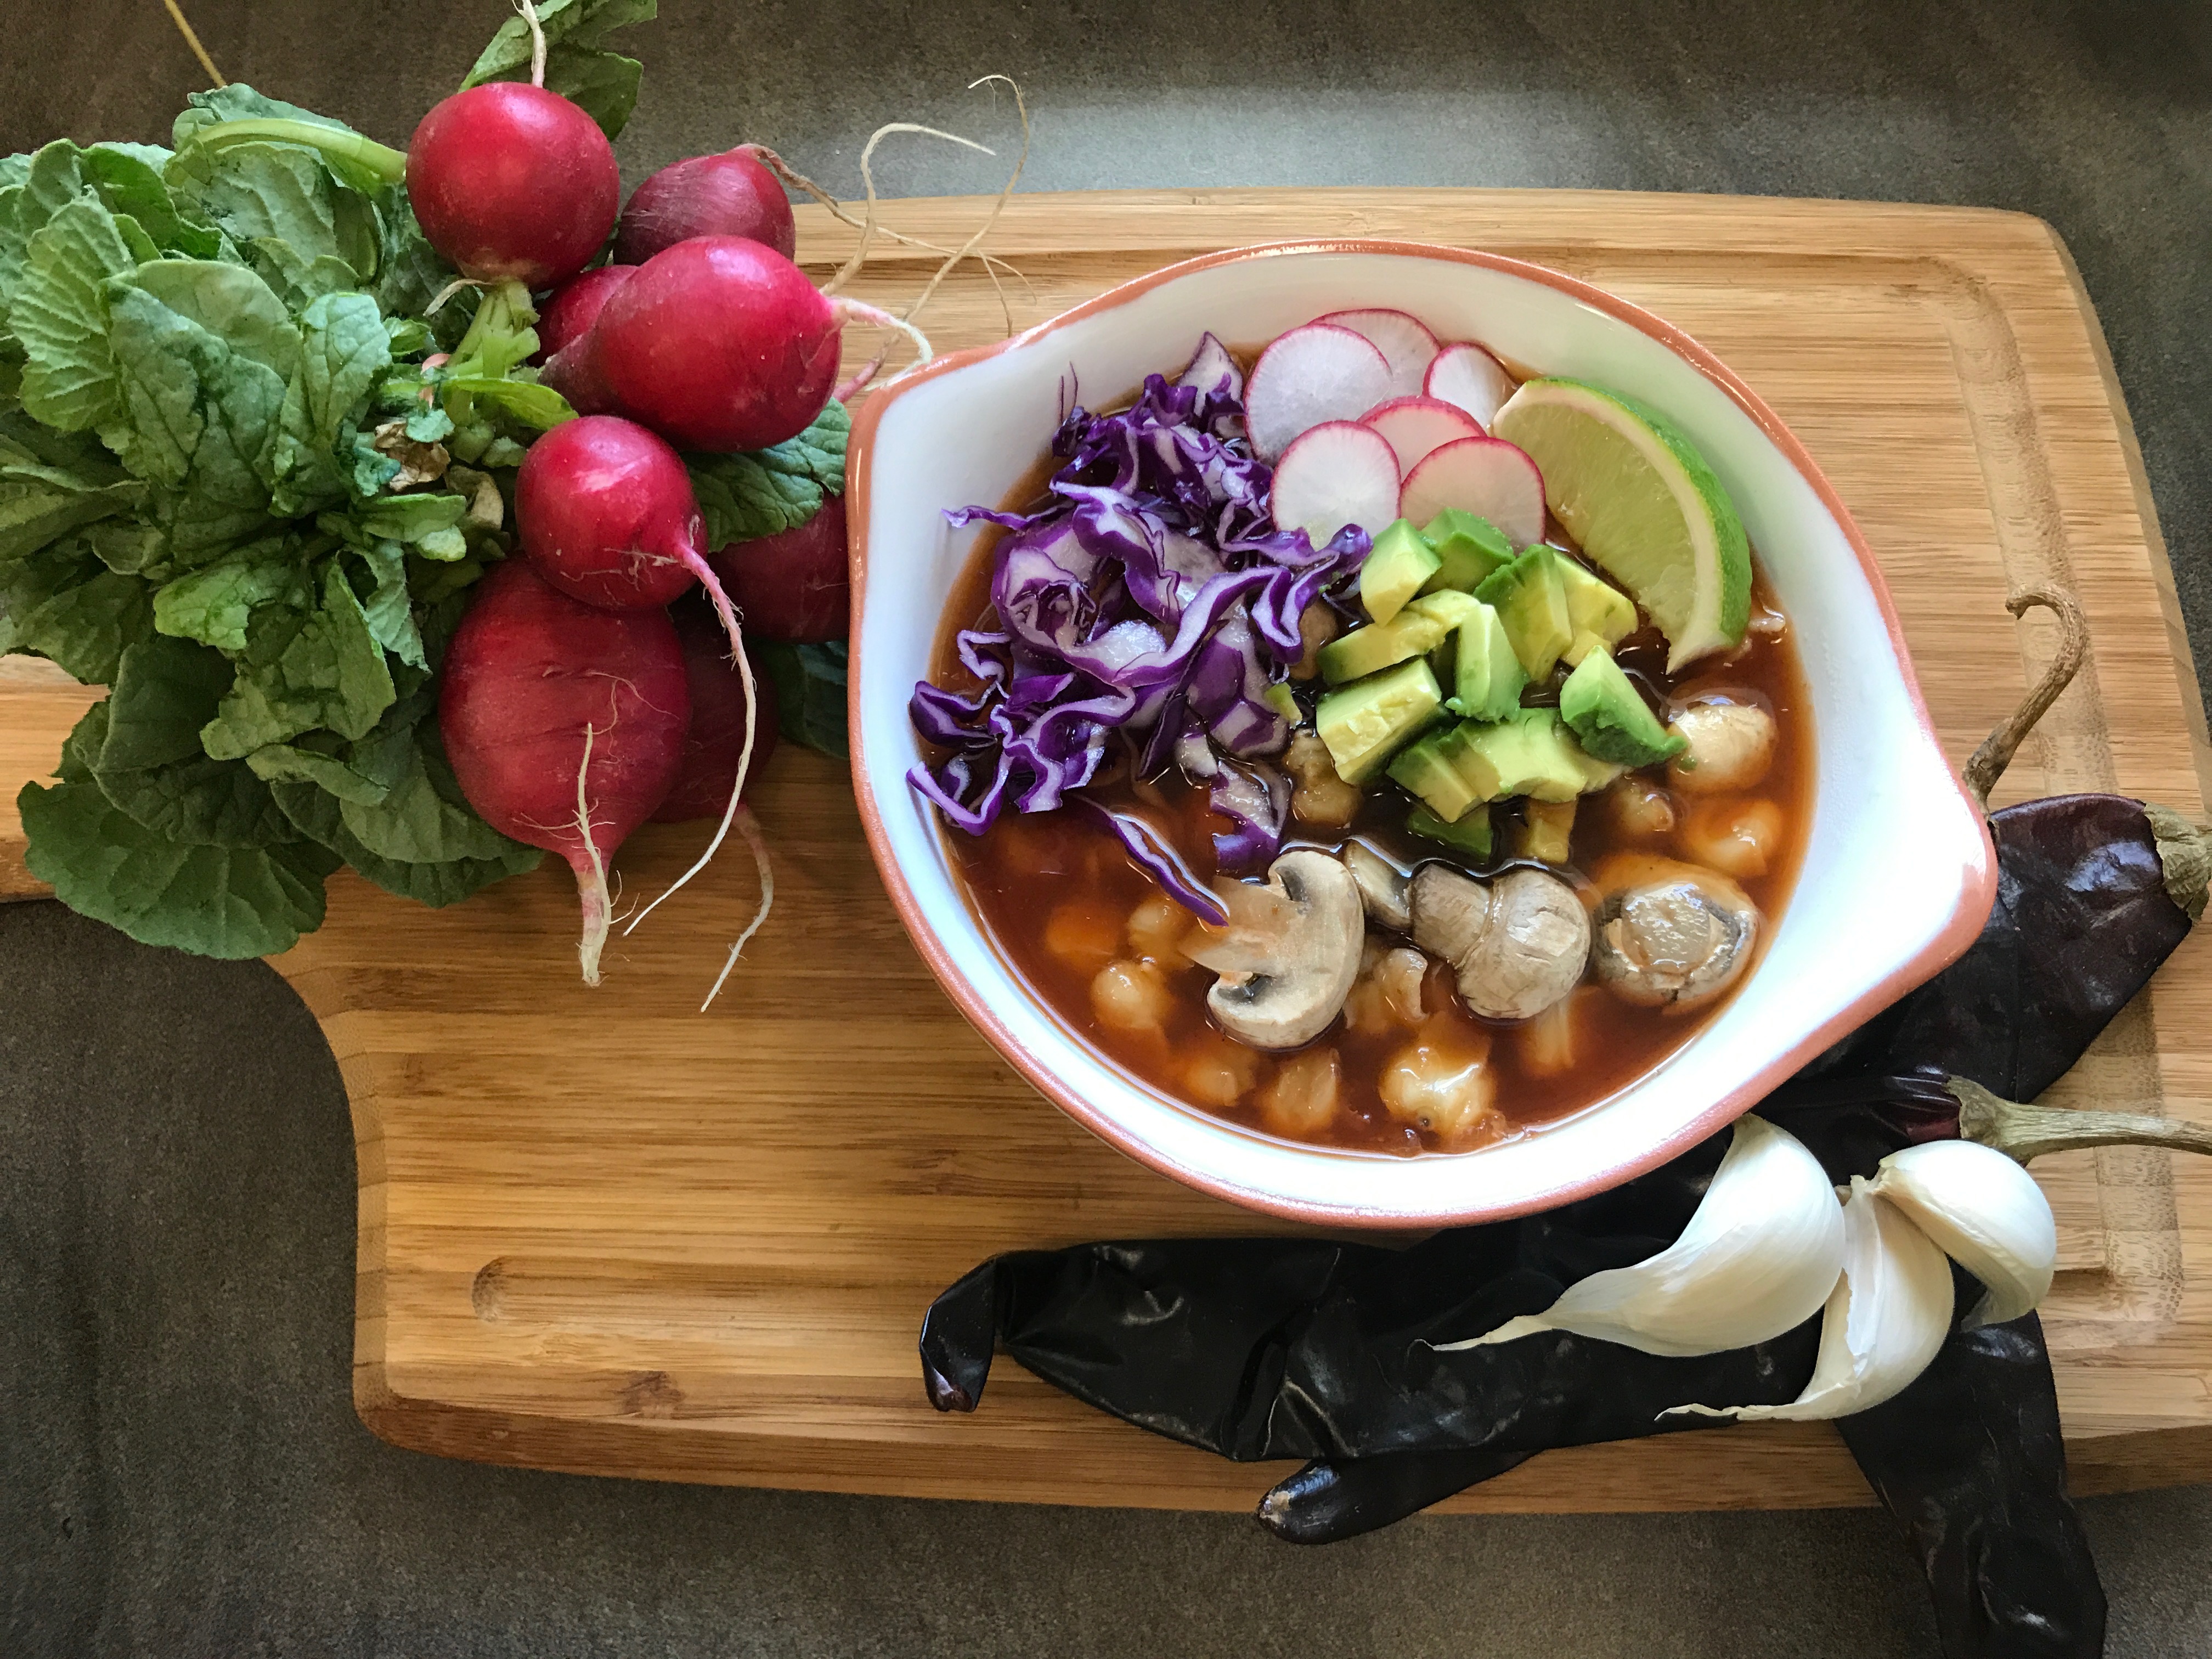 “Tres Amigas” share their stories, tips and pozole recipe!